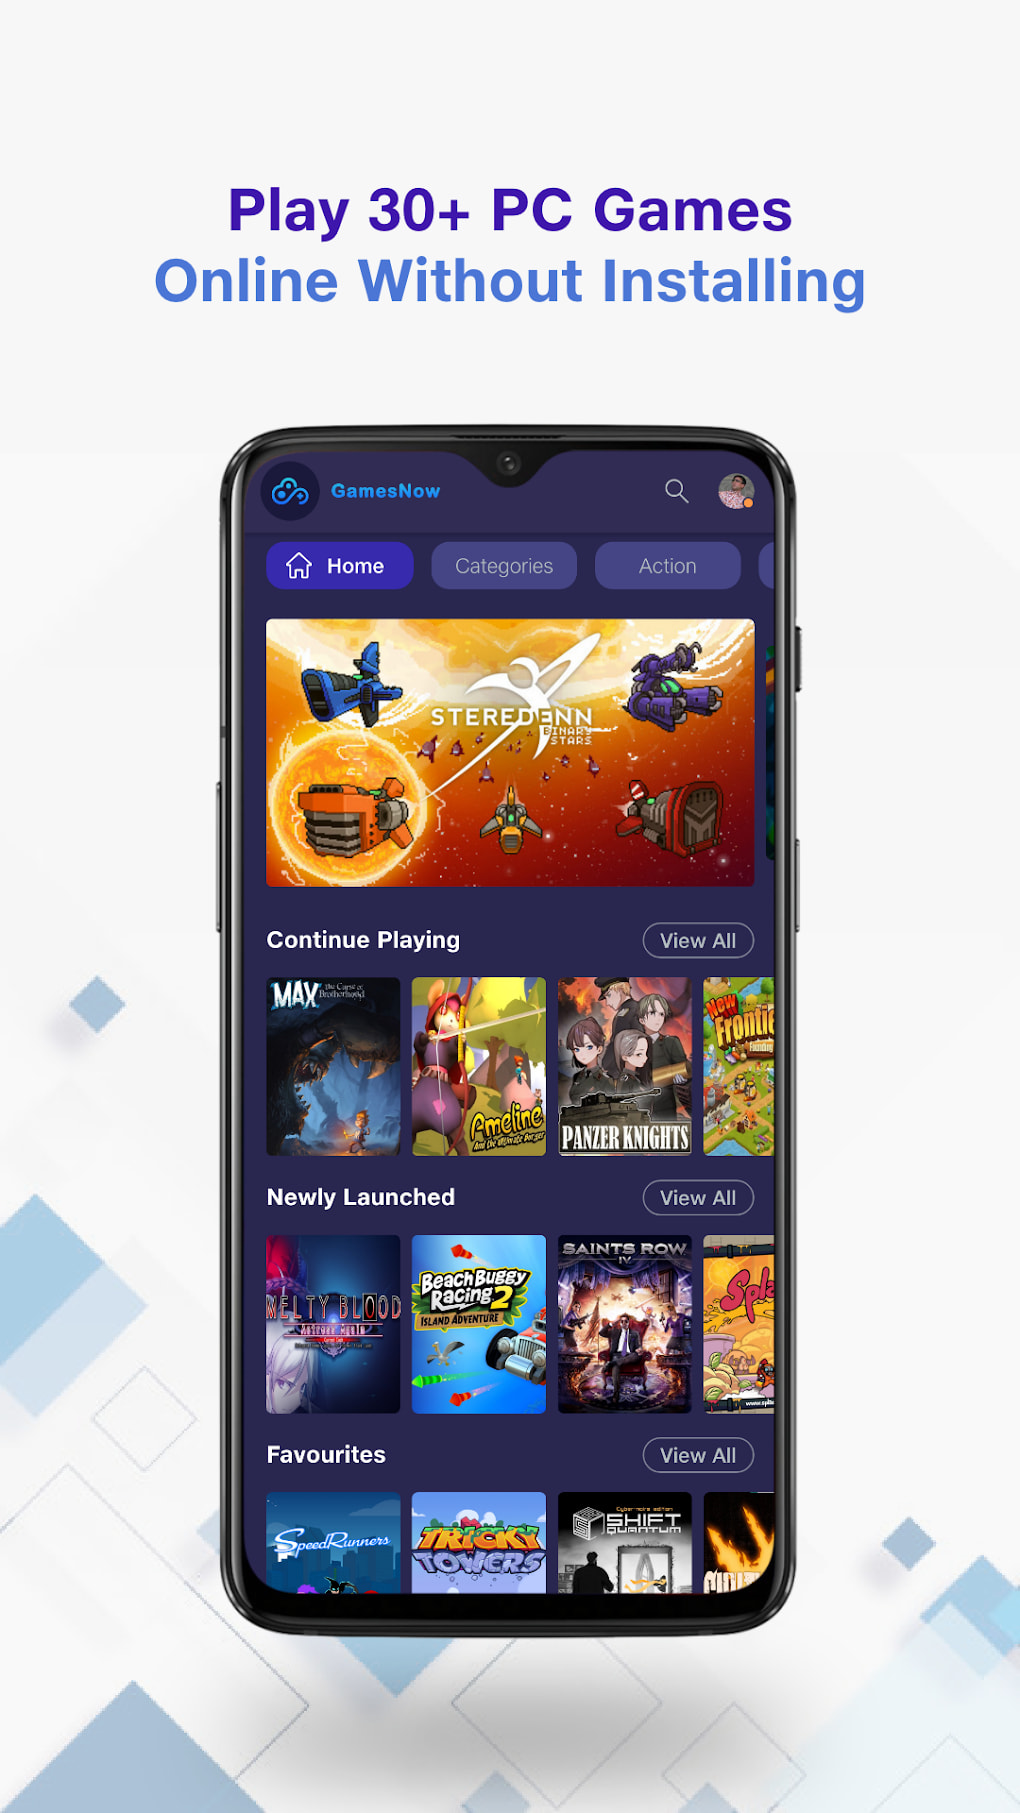 PlayRX Games - Cloud Gaming APK (Android App) - Free Download